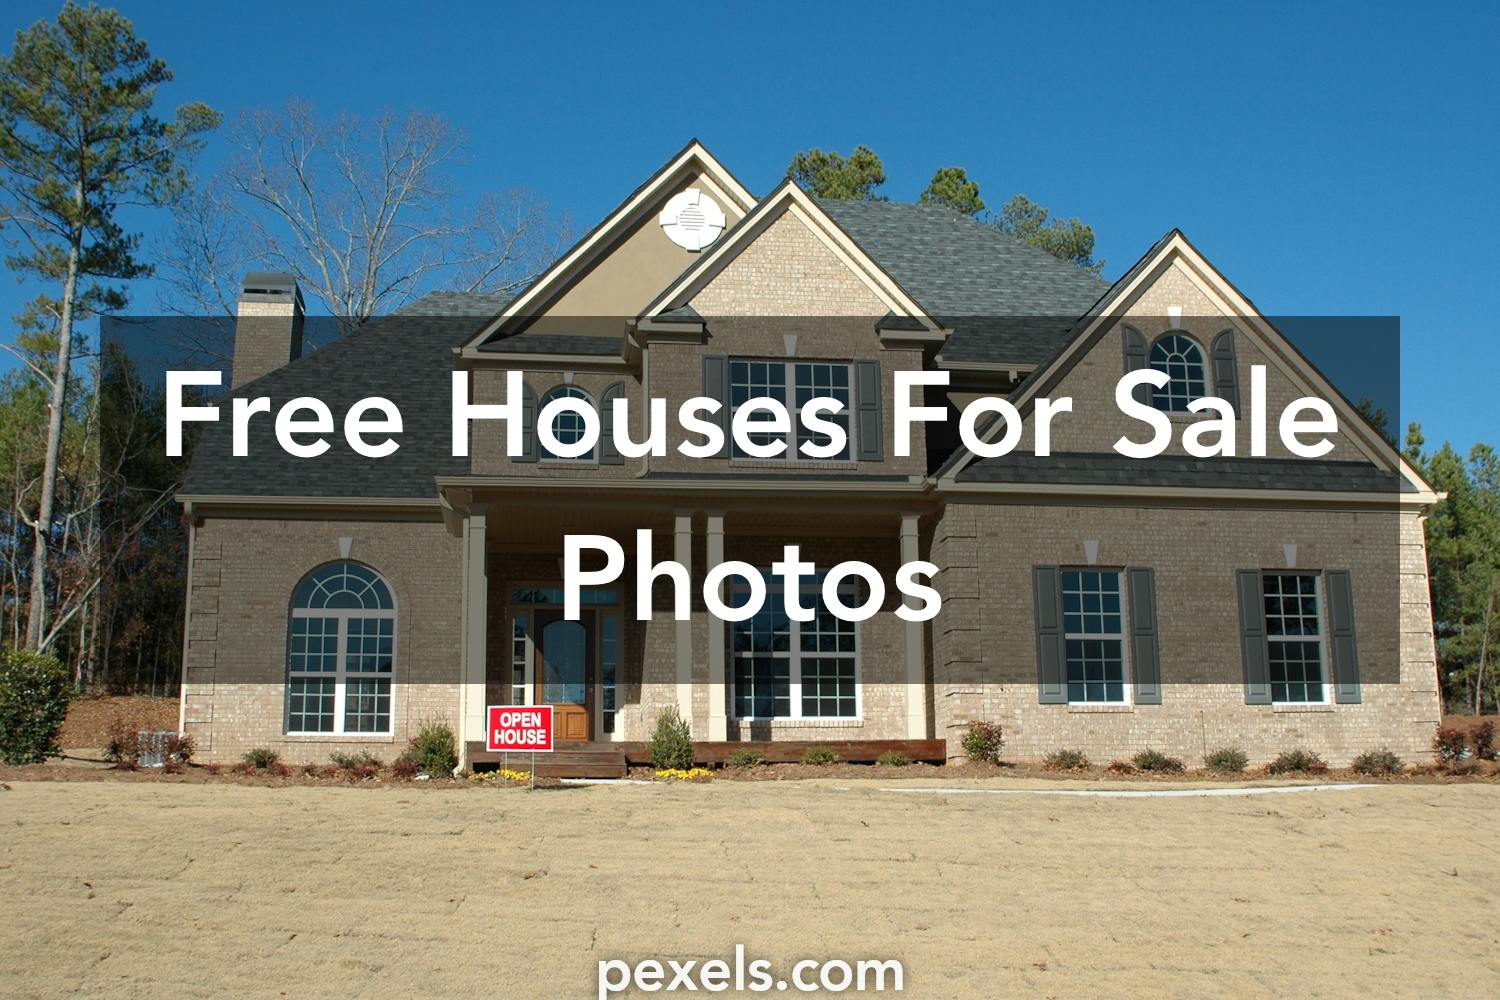 1000+ Great Houses For Sale Photos Pexels · Free Stock Photos